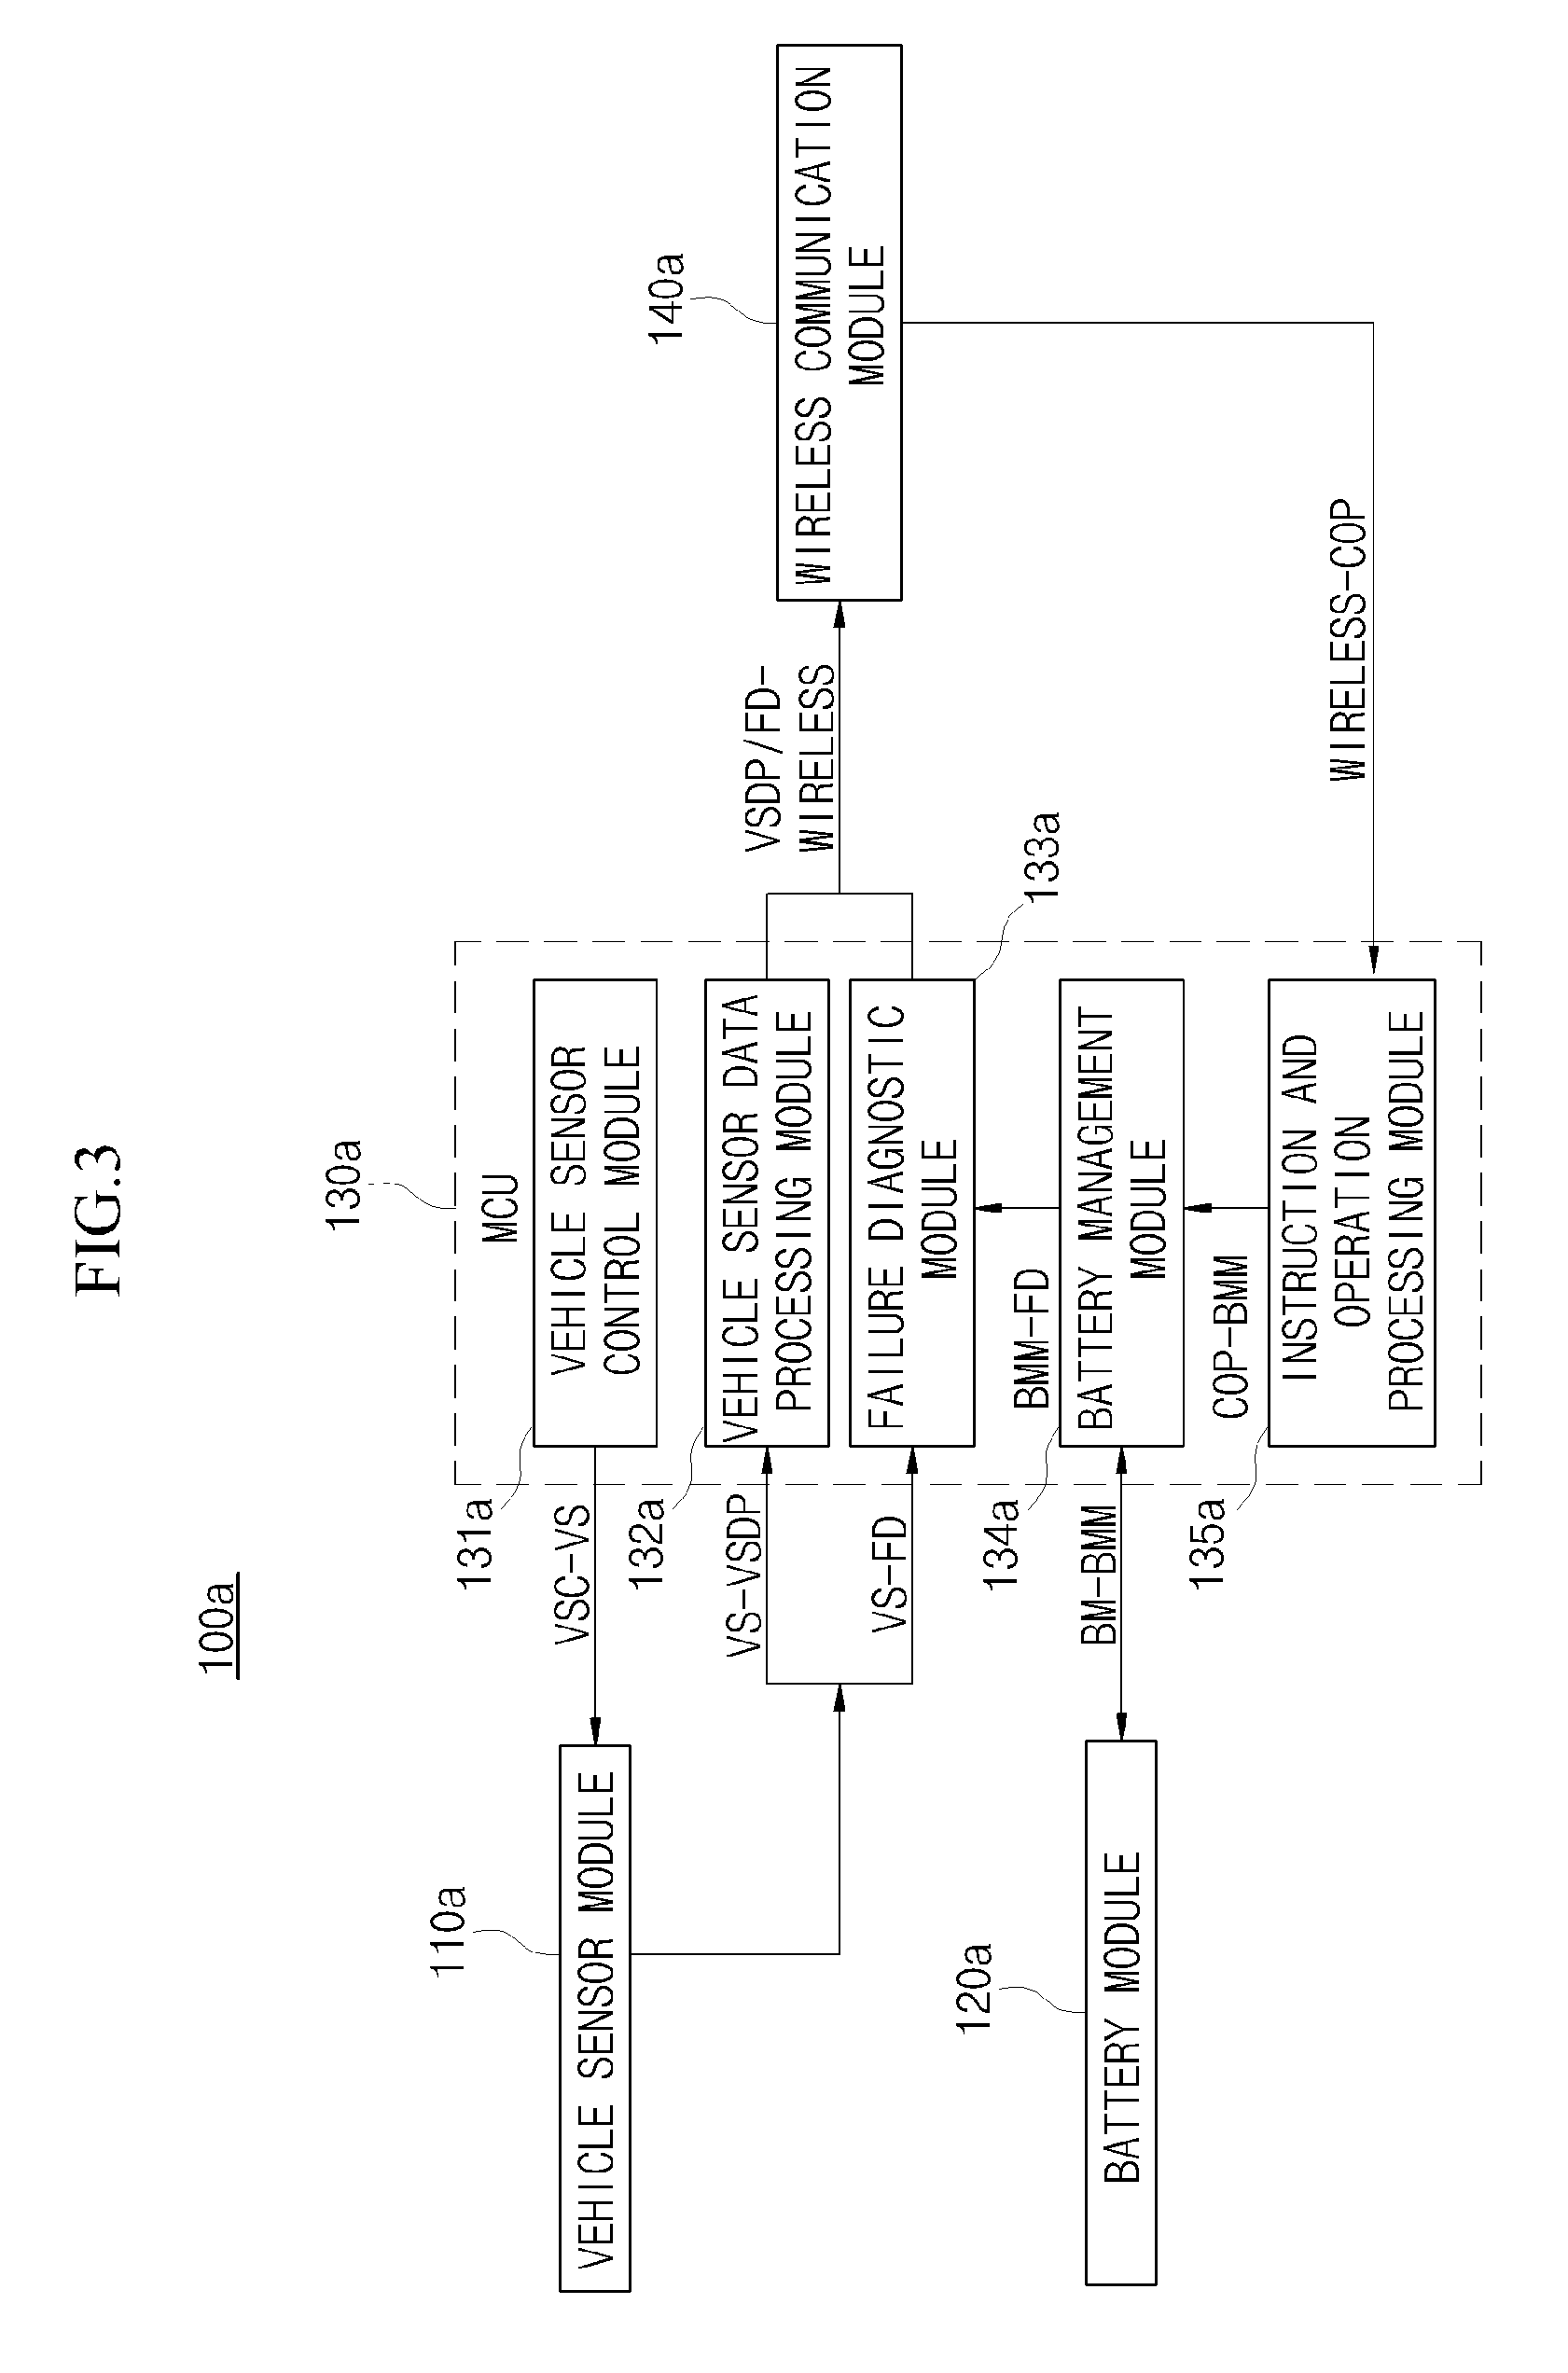 Vehicle wireless sensor network system and operating method thereof